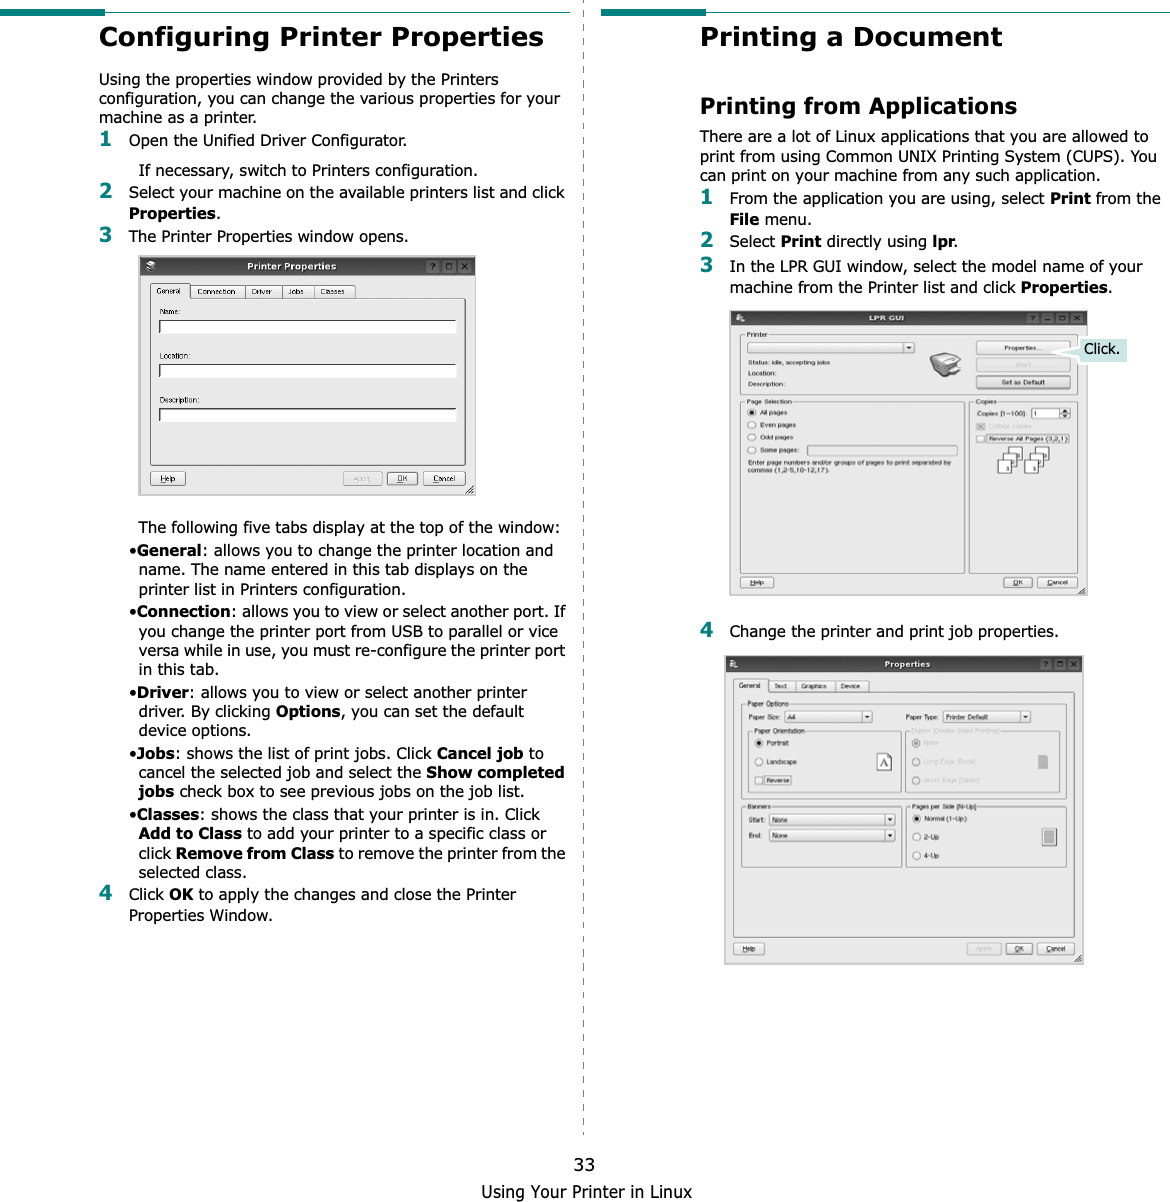 Using Your Printer in Linux33Configuring Printer PropertiesUsing the properties window provided by the Printers configuration, you can change the various properties for your machine as a printer.1Open the Unified Driver Configurator.If necessary, switch to Printers configuration.2Select your machine on the available printers list and click Properties.3The Printer Properties window opens.The following five tabs display at the top of the window:•General: allows you to change the printer location and name. The name entered in this tab displays on the printer list in Printers configuration.•Connection: allows you to view or select another port. If you change the printer port from USB to parallel or vice versa while in use, you must re-configure the printer port in this tab.•Driver: allows you to view or select another printer driver. By clicking Options, you can set the default device options.•Jobs: shows the list of print jobs. Click Cancel job to cancel the selected job and select the Show completed jobs check box to see previous jobs on the job list.•Classes: shows the class that your printer is in. Click Add to Class to add your printer to a specific class or click Remove from Class to remove the printer from the selected class.4Click OK to apply the changes and close the Printer Properties Window.Printing a DocumentPrinting from ApplicationsThere are a lot of Linux applications that you are allowed to print from using Common UNIX Printing System (CUPS). You can print on your machine from any such application.1From the application you are using, select Print from the File menu.2Select Print directly using lpr.3In the LPR GUI window, select the model name of your machine from the Printer list and click Properties.4Change the printer and print job properties.Click.